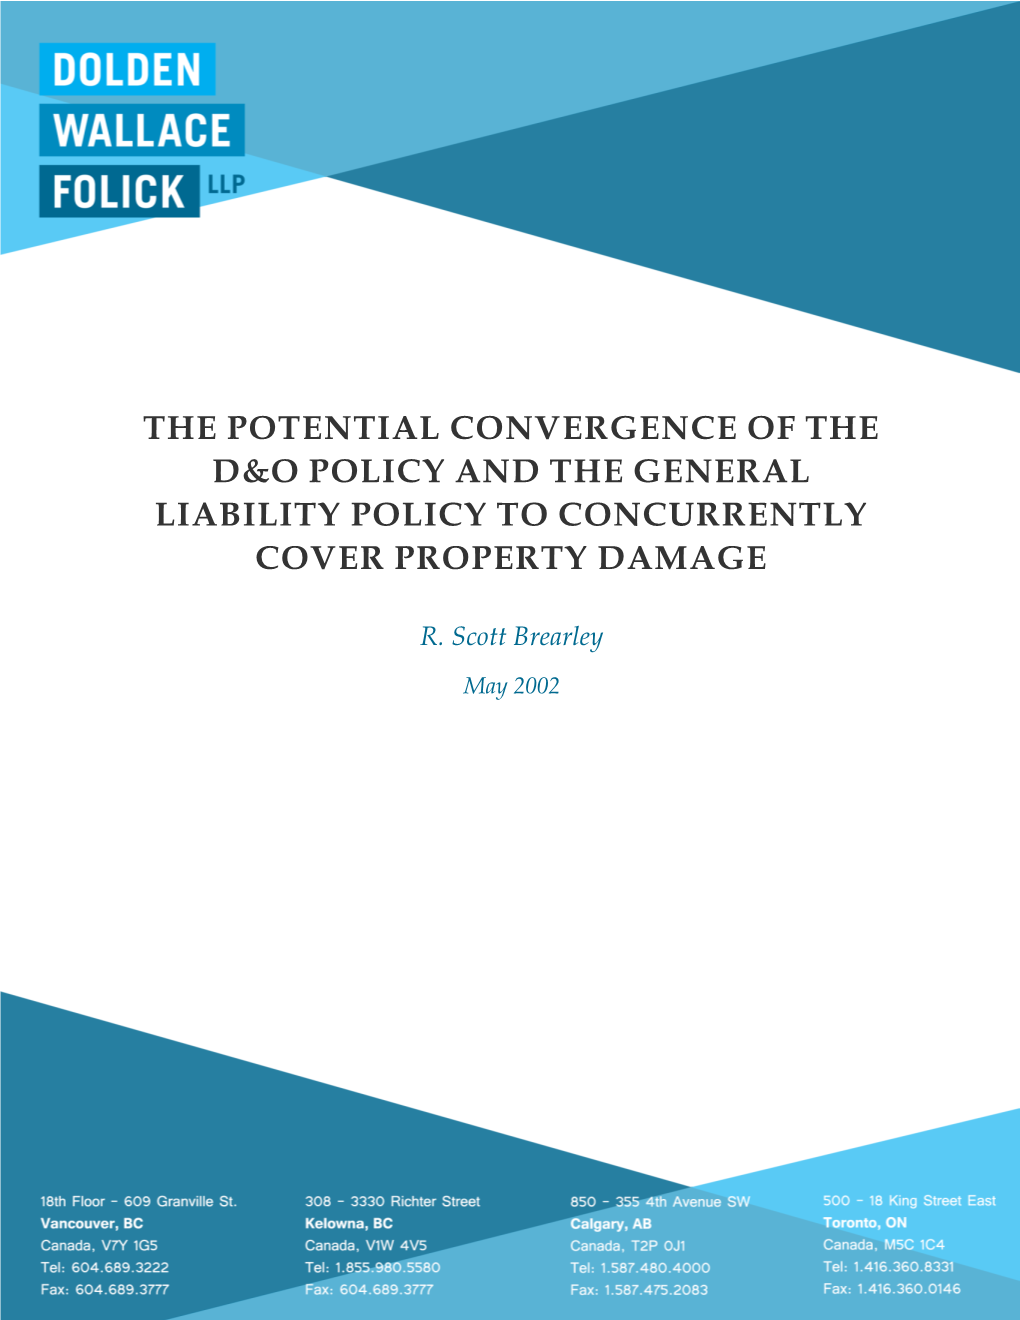 The Potential Convergence of the D&O Policy